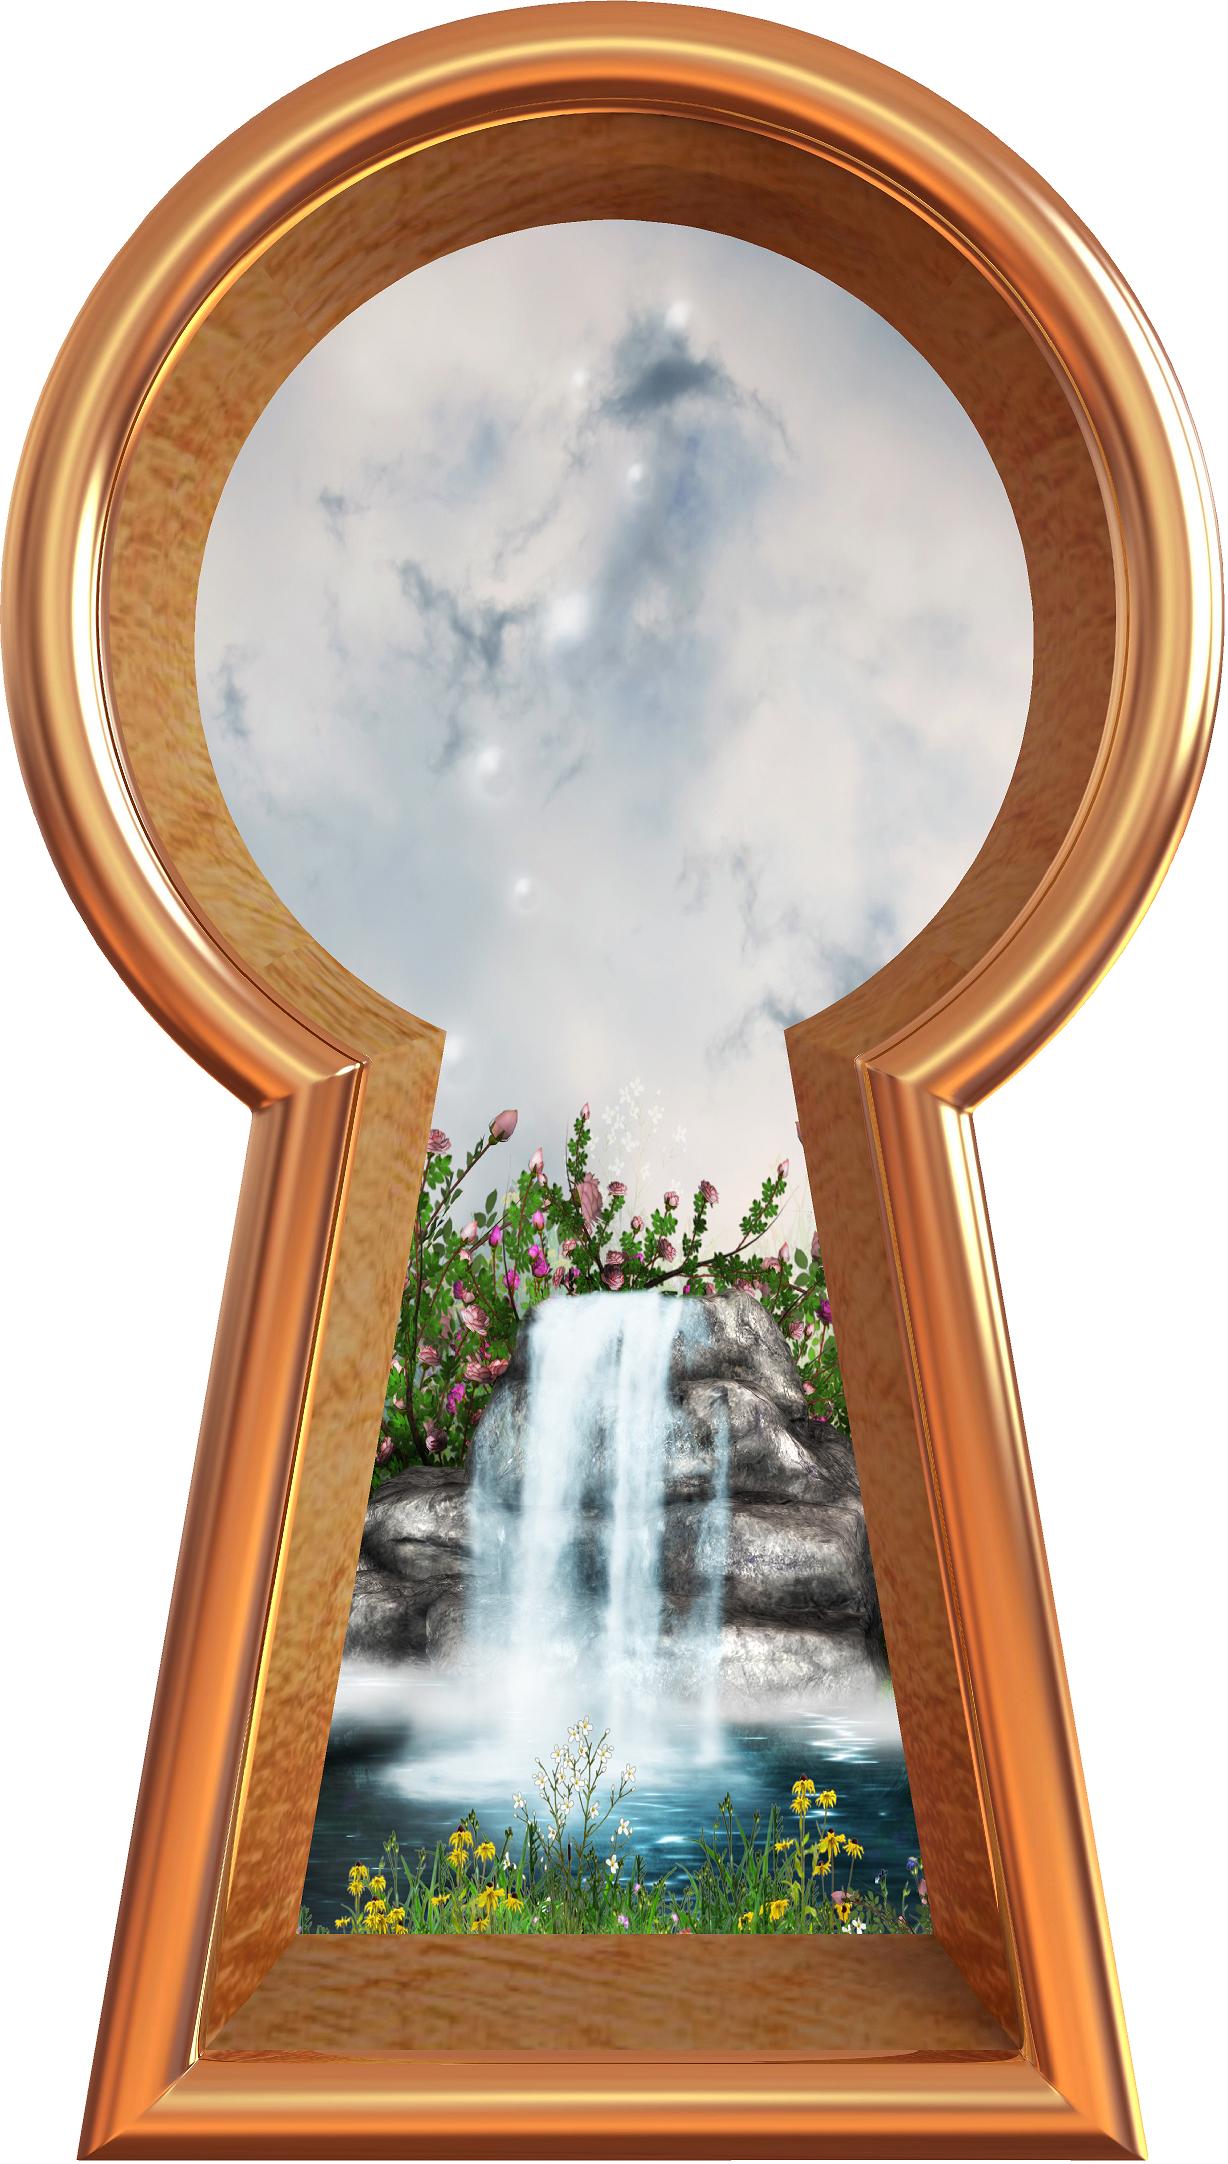 3D Keyhole Wall Decal Fairy Tale Waterfall Fantasy Wall Art Removable Wall Sticker